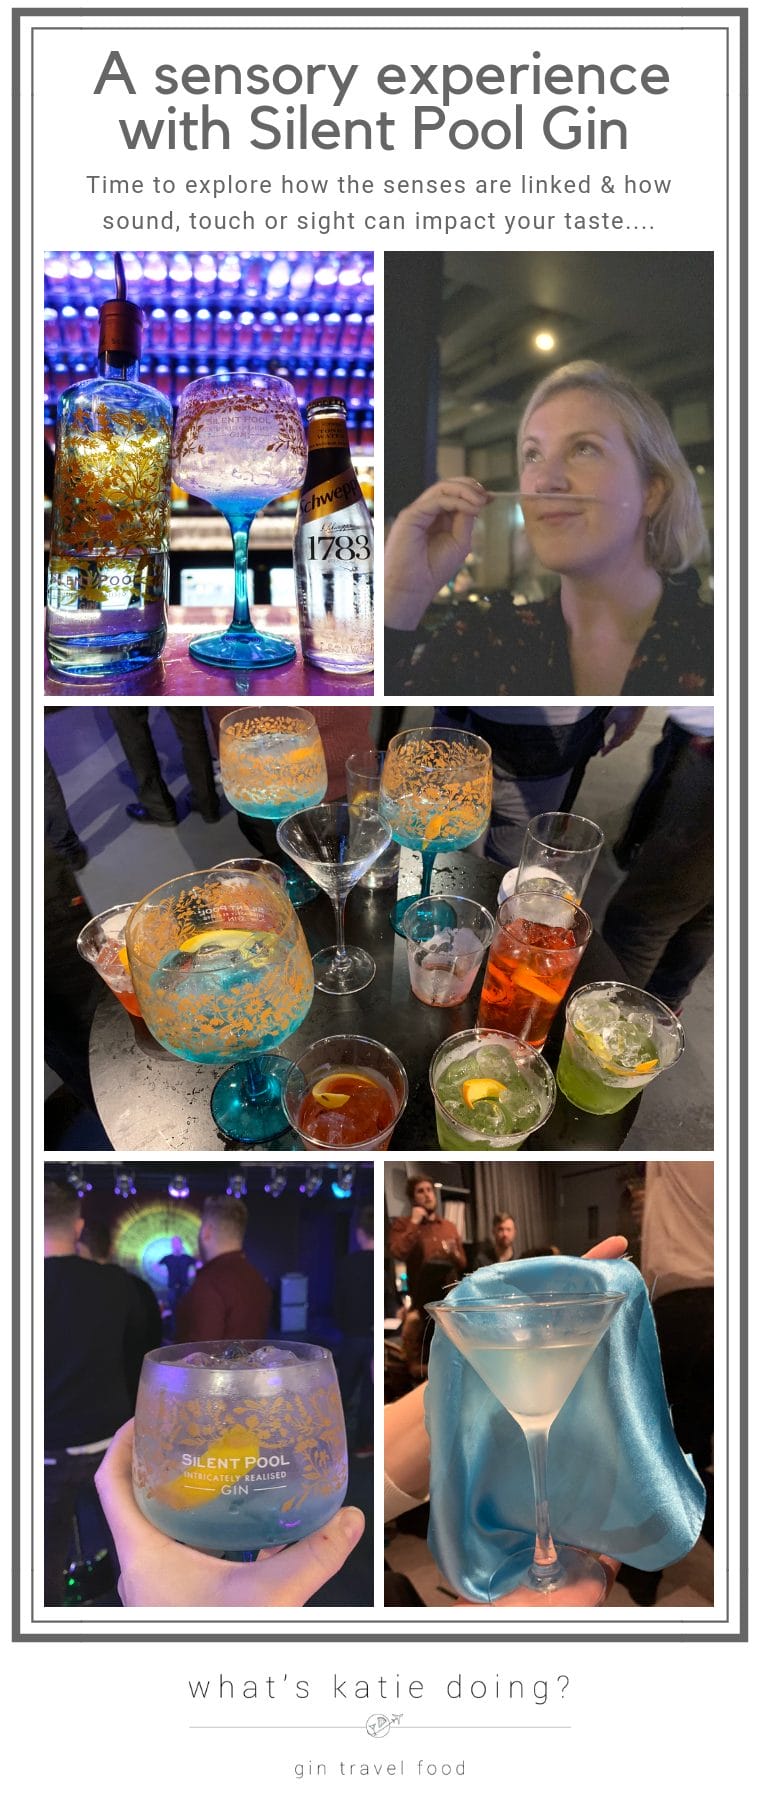 A sensory experience with Silent Pool gin on What's Katie Doing? blog. Time to explore how the senses impact each other in the world of gin!